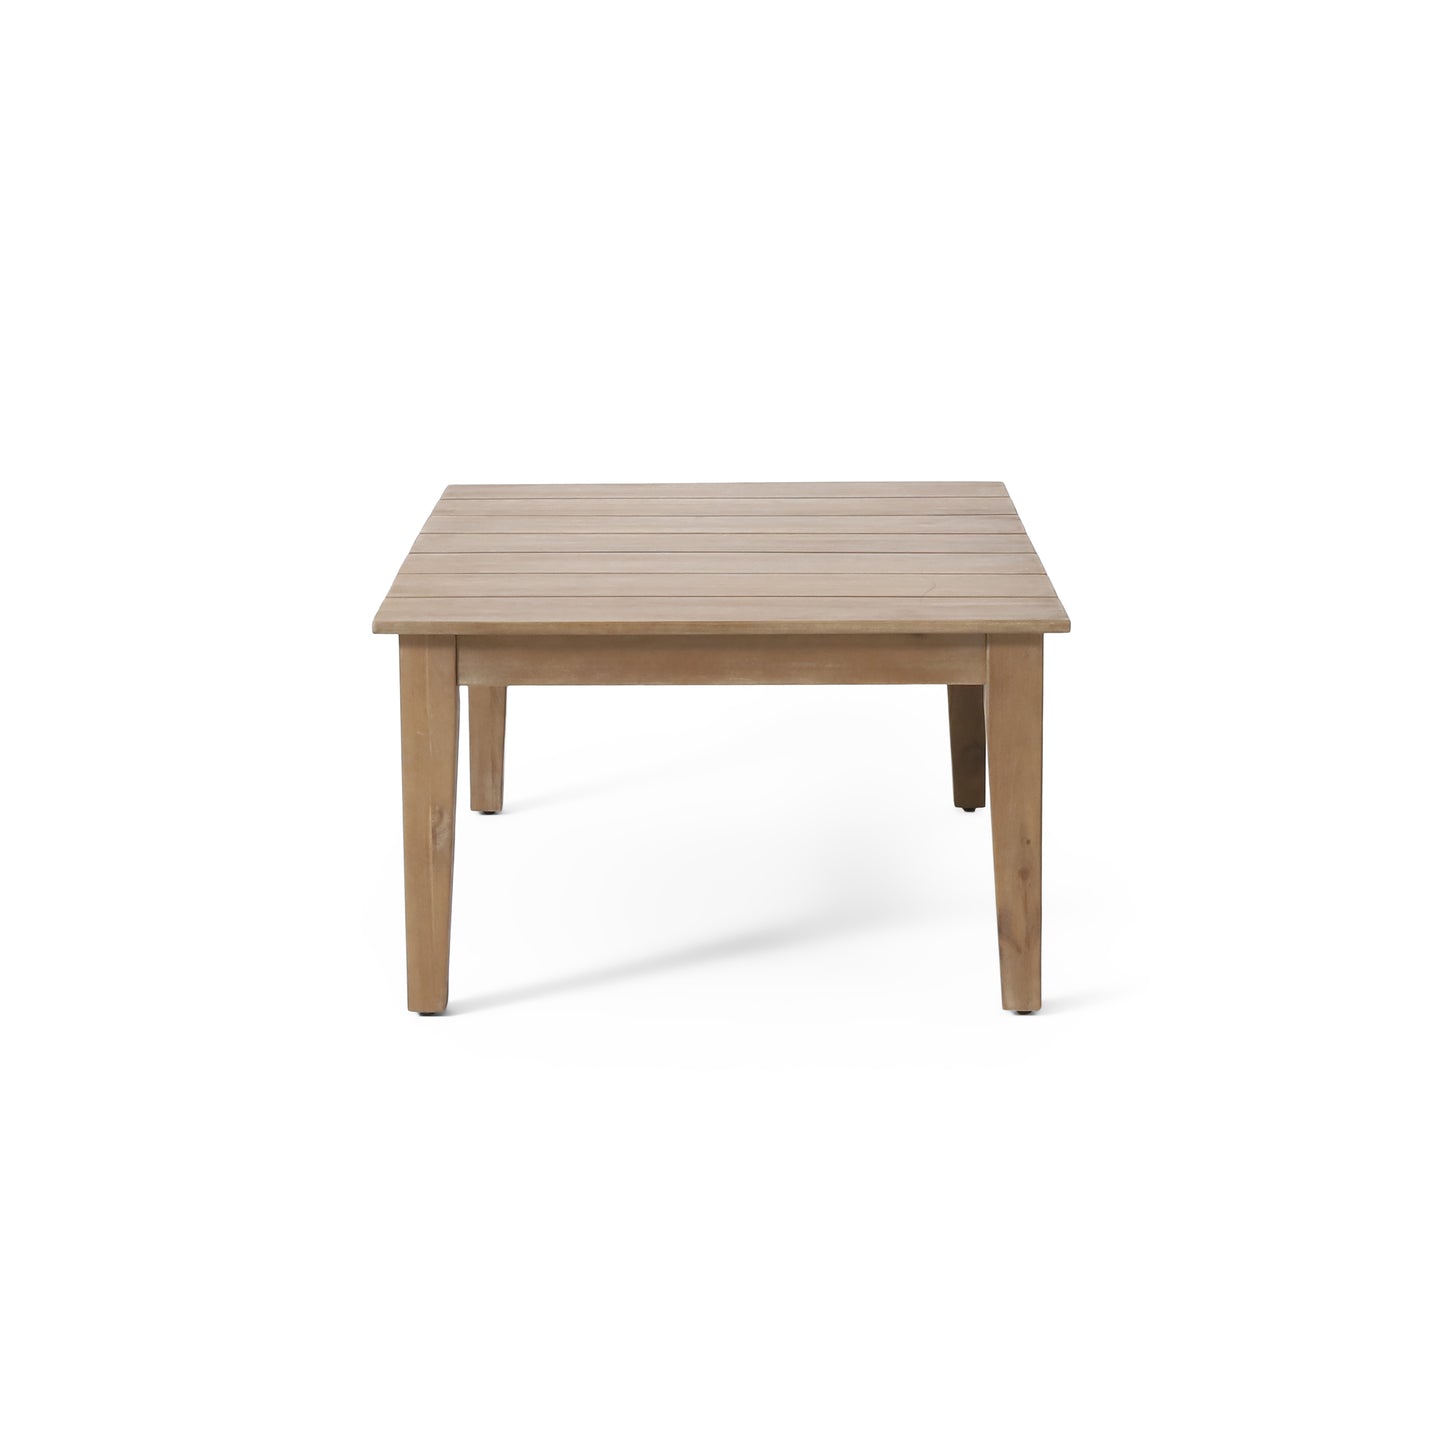 Elmcrest Outdoor Acacia Wood Coffee Table, Light Brown